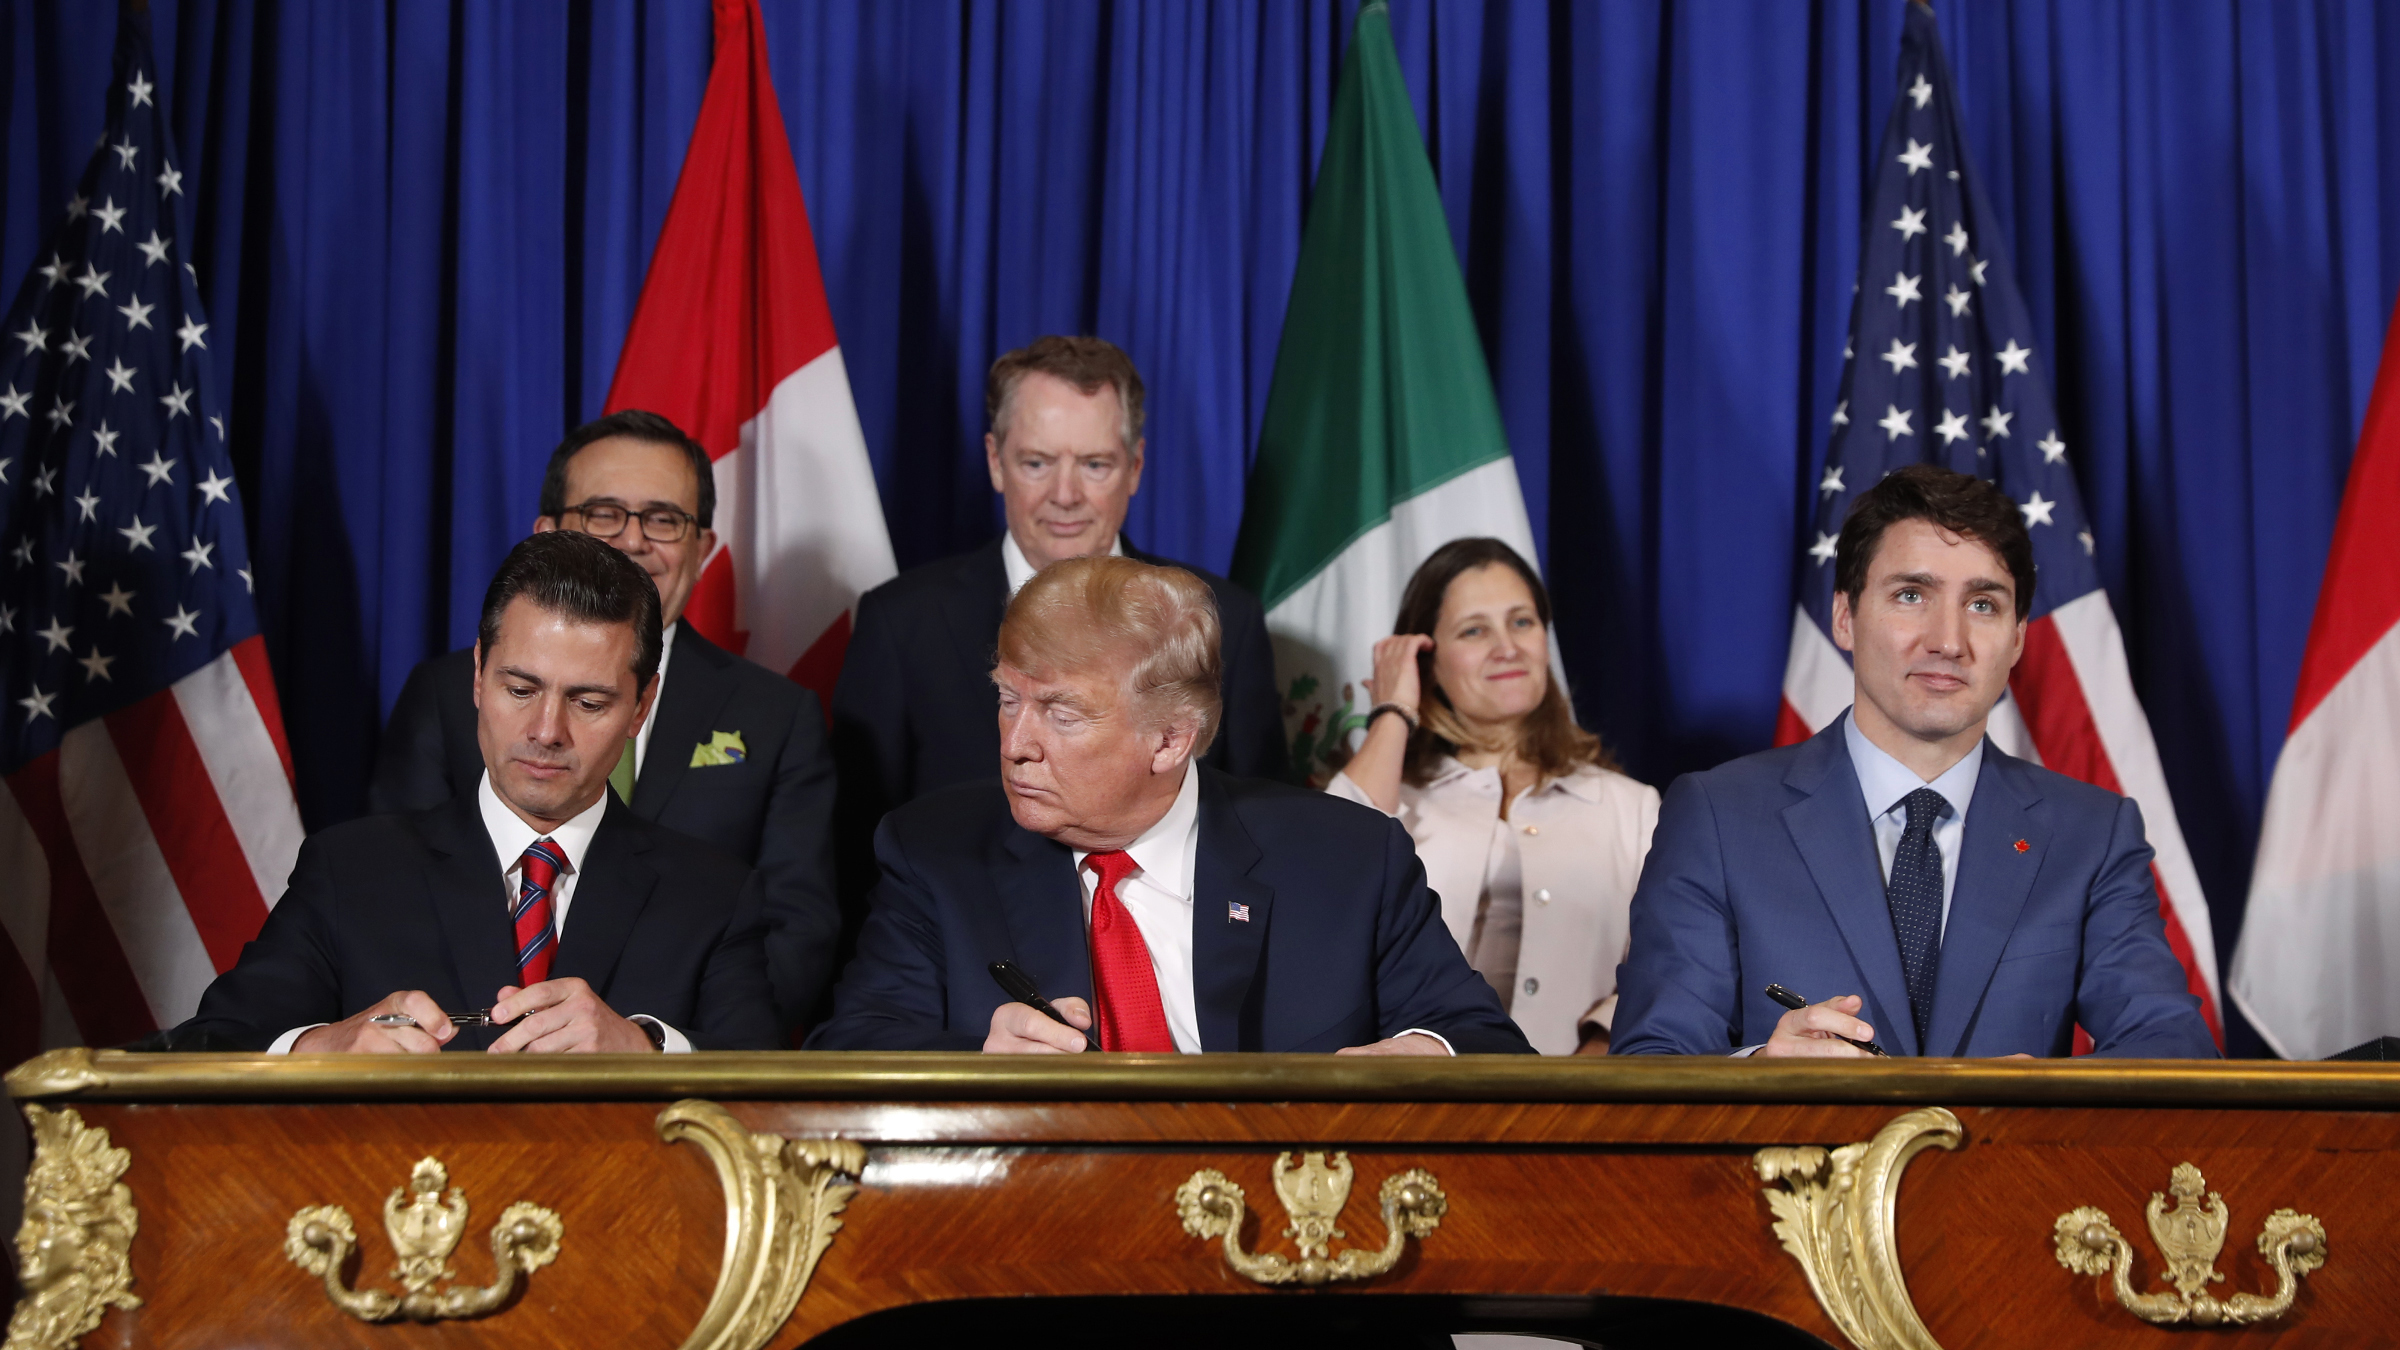 US President Donald Trump, Canada's Prime Minister Justin Trudeau, right, and Mexico's President Enrique Pena Nieto, left, participate in the USMCA signing ceremony in Buenos Aires 